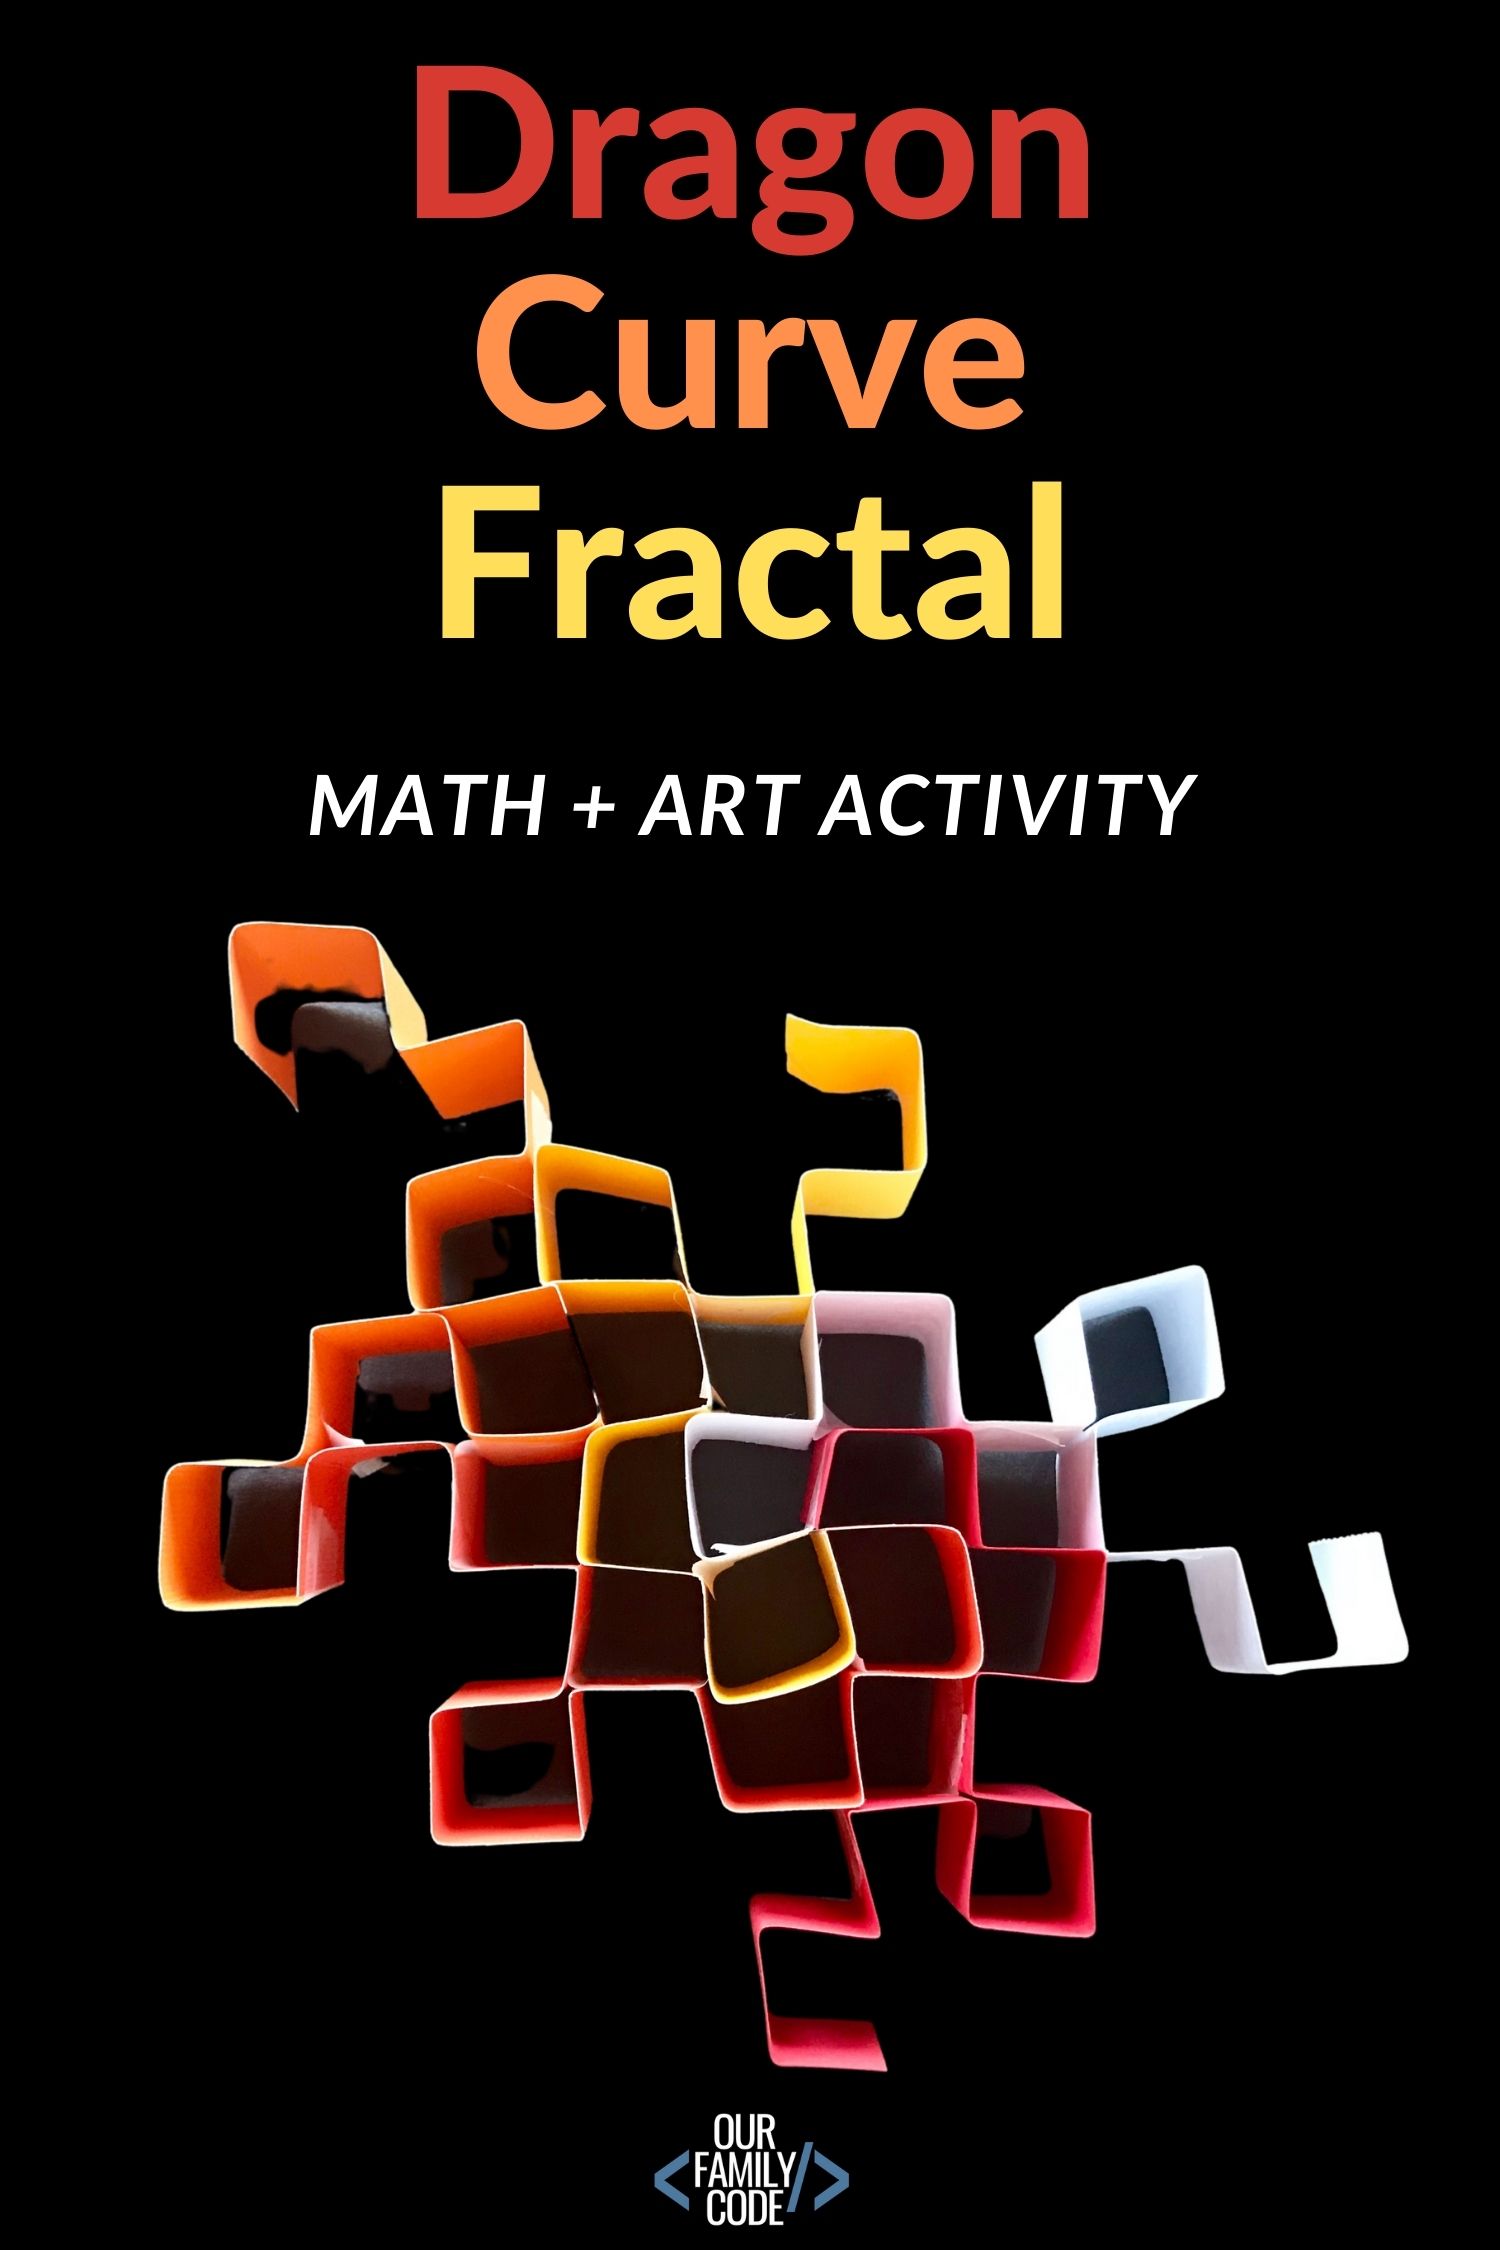 Learn about dragon curve fractals and how to make dragon curve fractal art with this awesome STEAM activity! #STEM #STEAM #mathart #fractalart #elementarySTEAM #homeschool